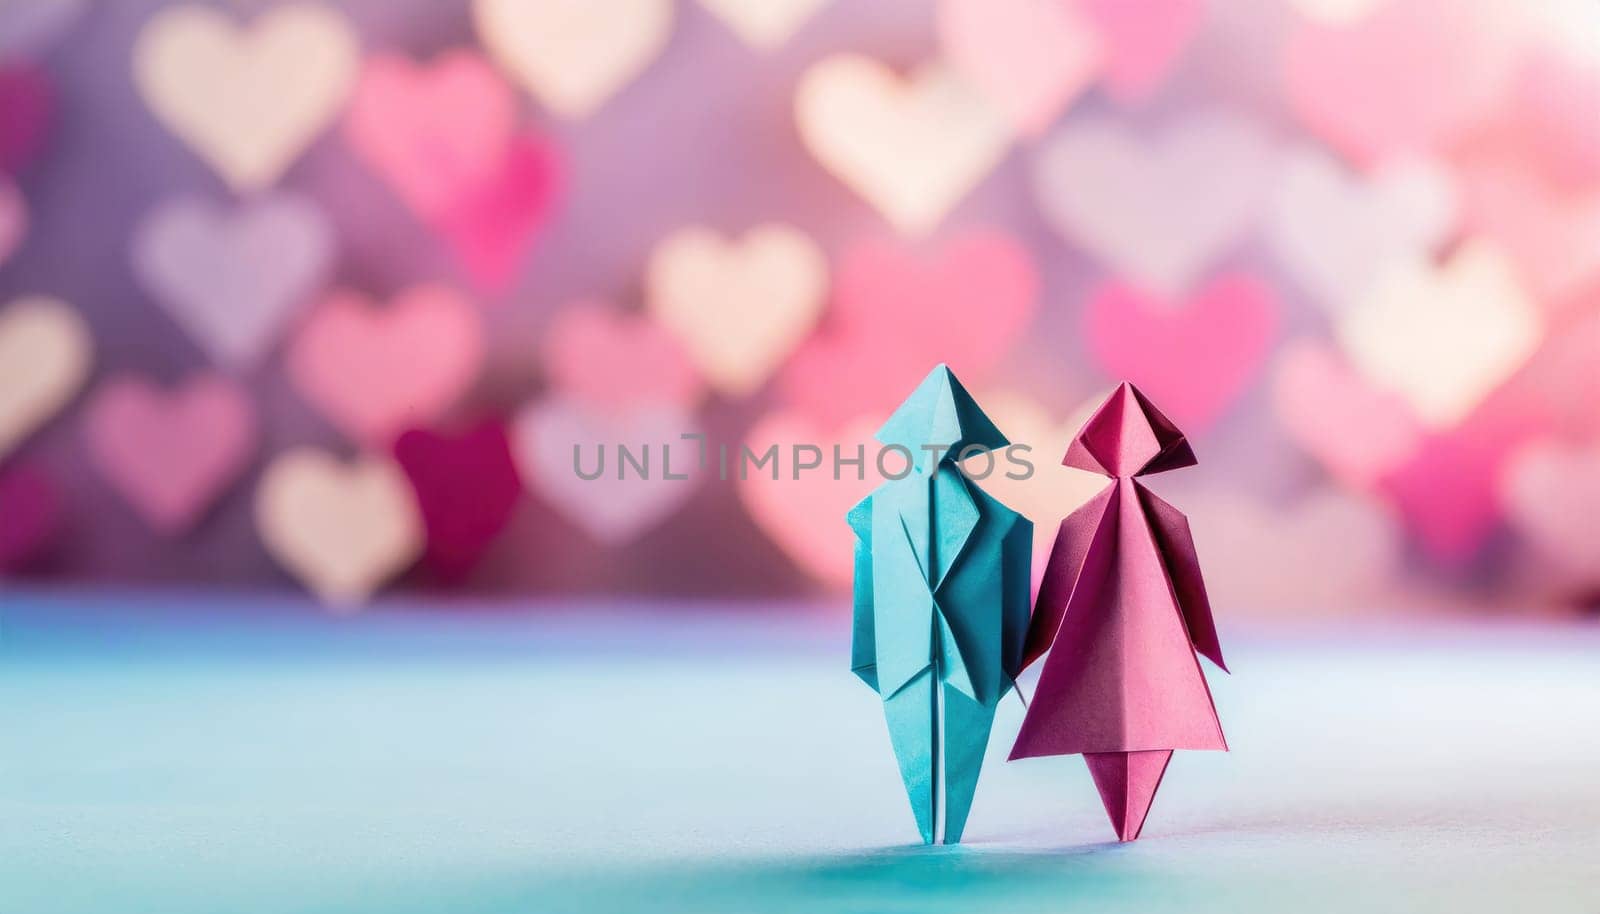  a couple, valentine concept, paper origami cool colors backlighting, paper art.